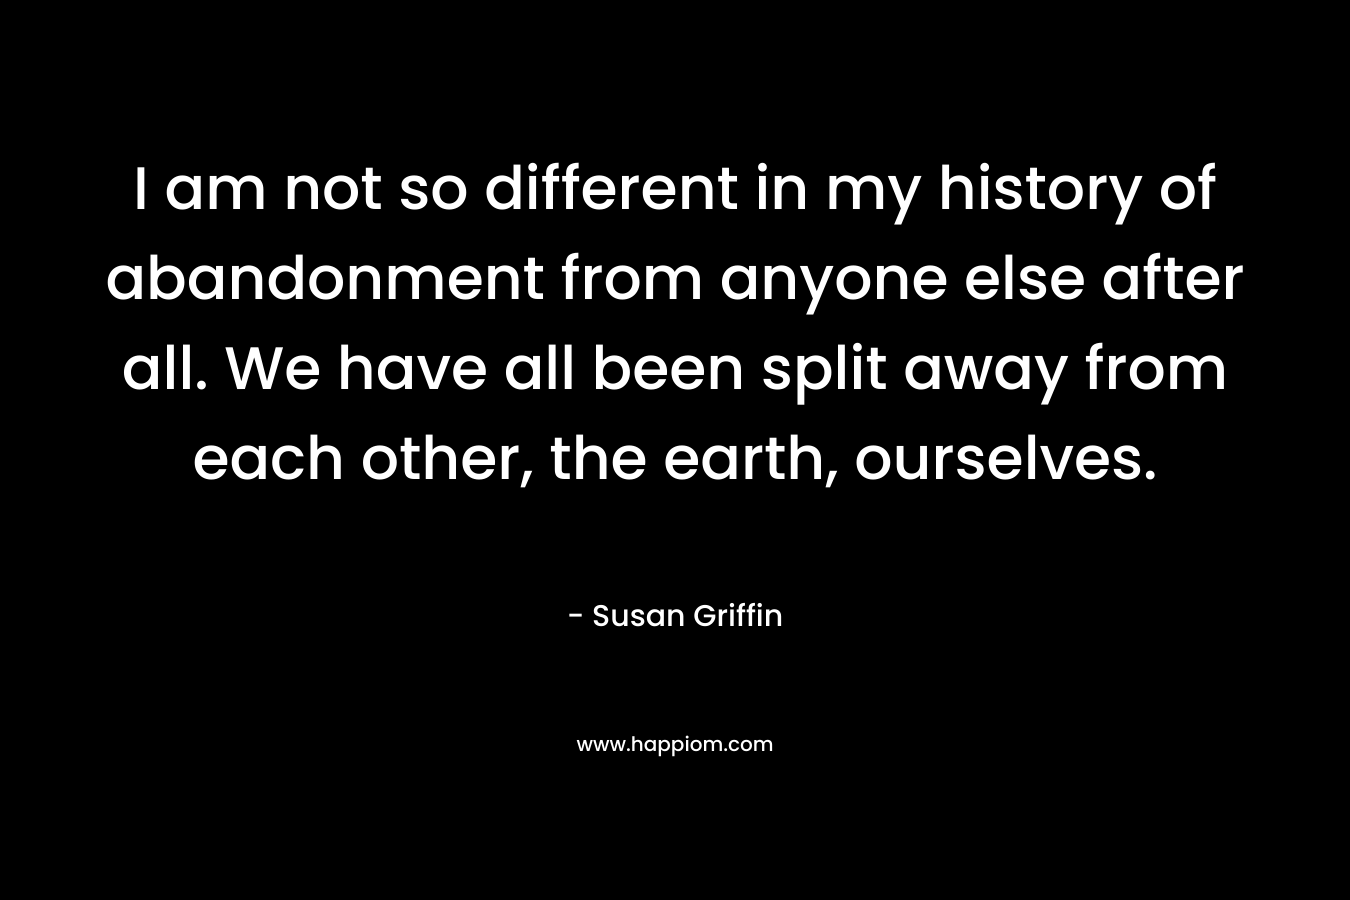 I am not so different in my history of abandonment from anyone else after all. We have all been split away from each other, the earth, ourselves. – Susan Griffin